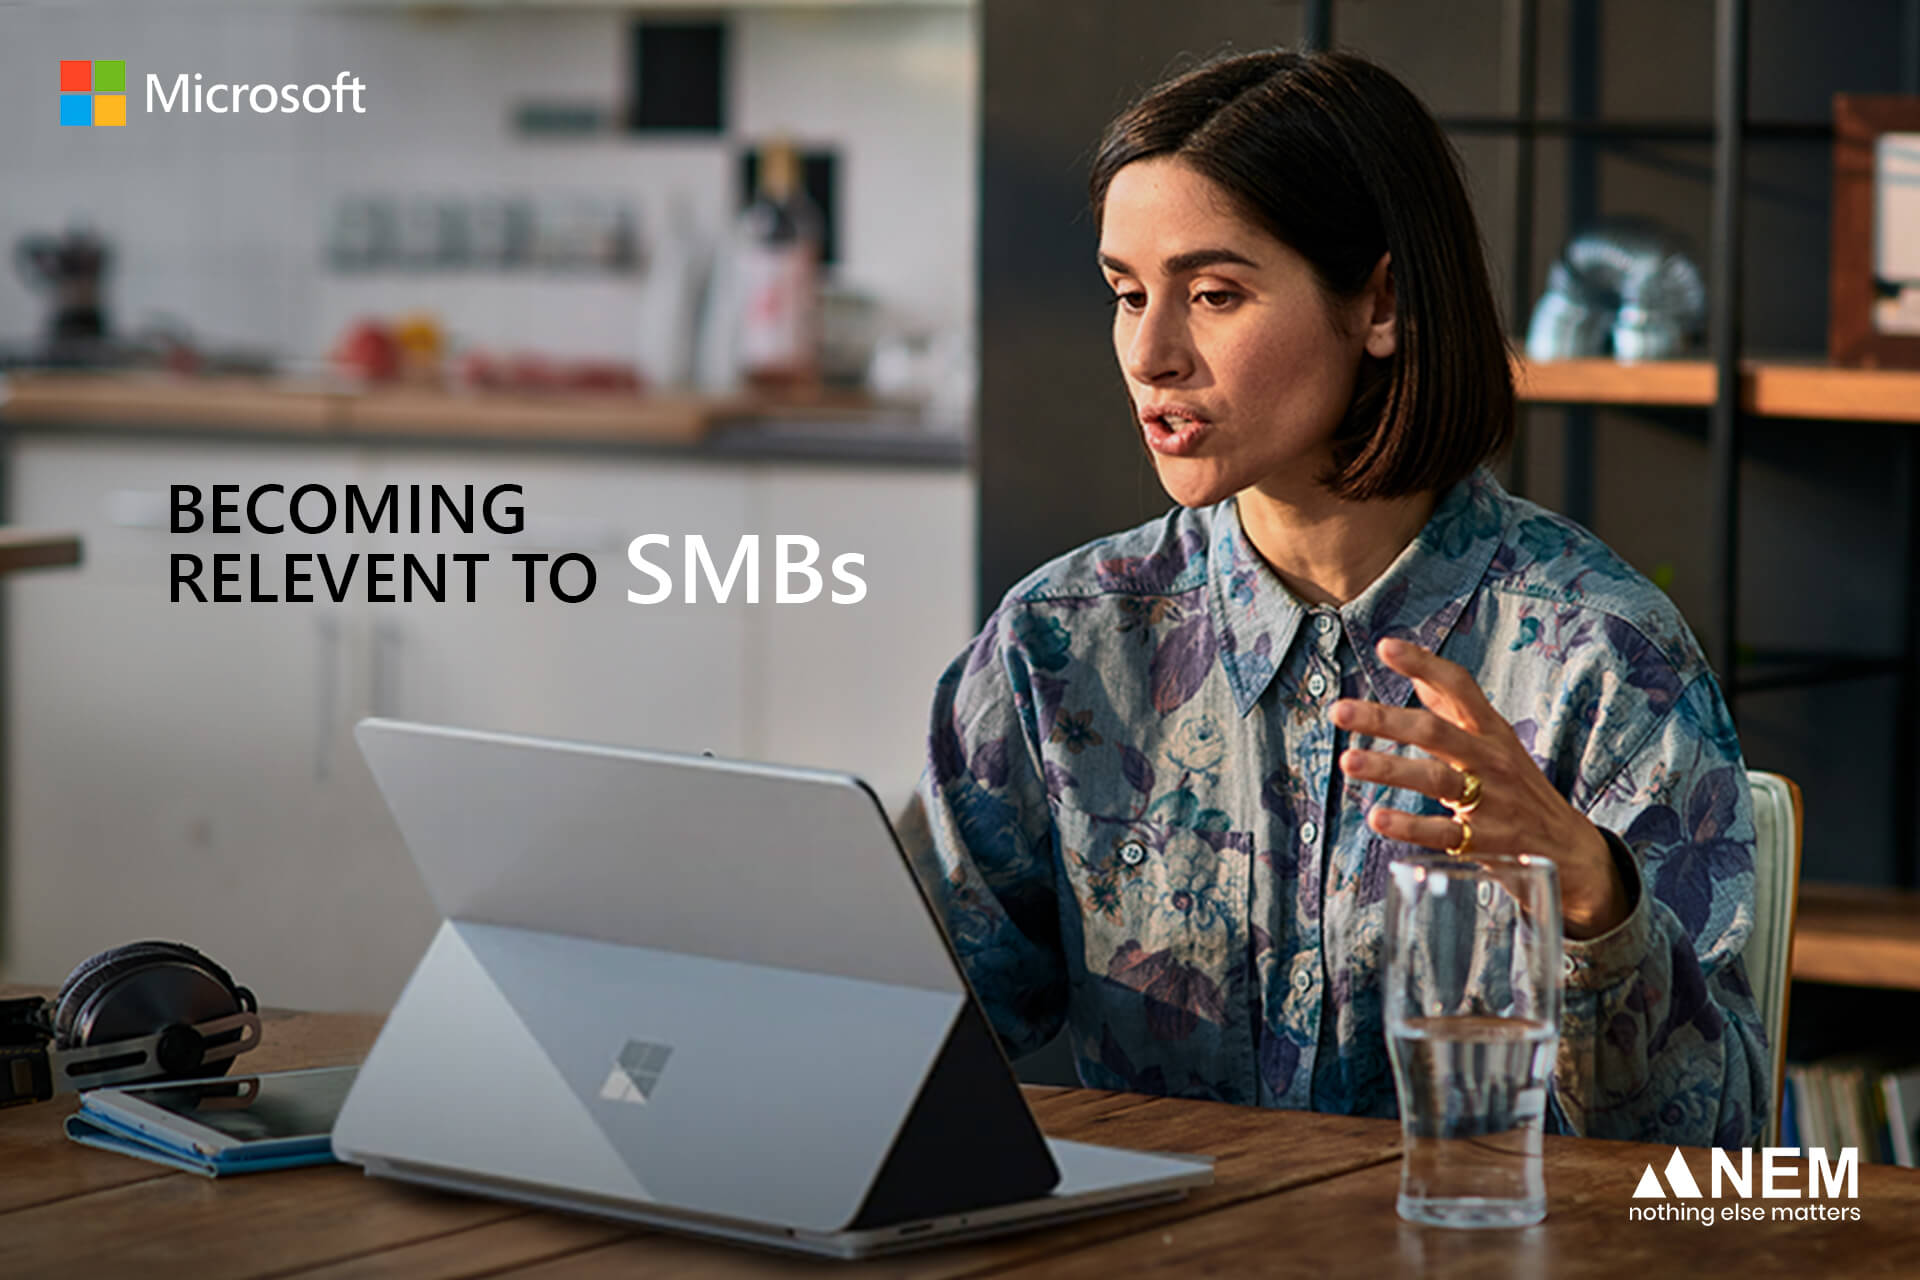 Microsoft: Becoming relevant to SMBs